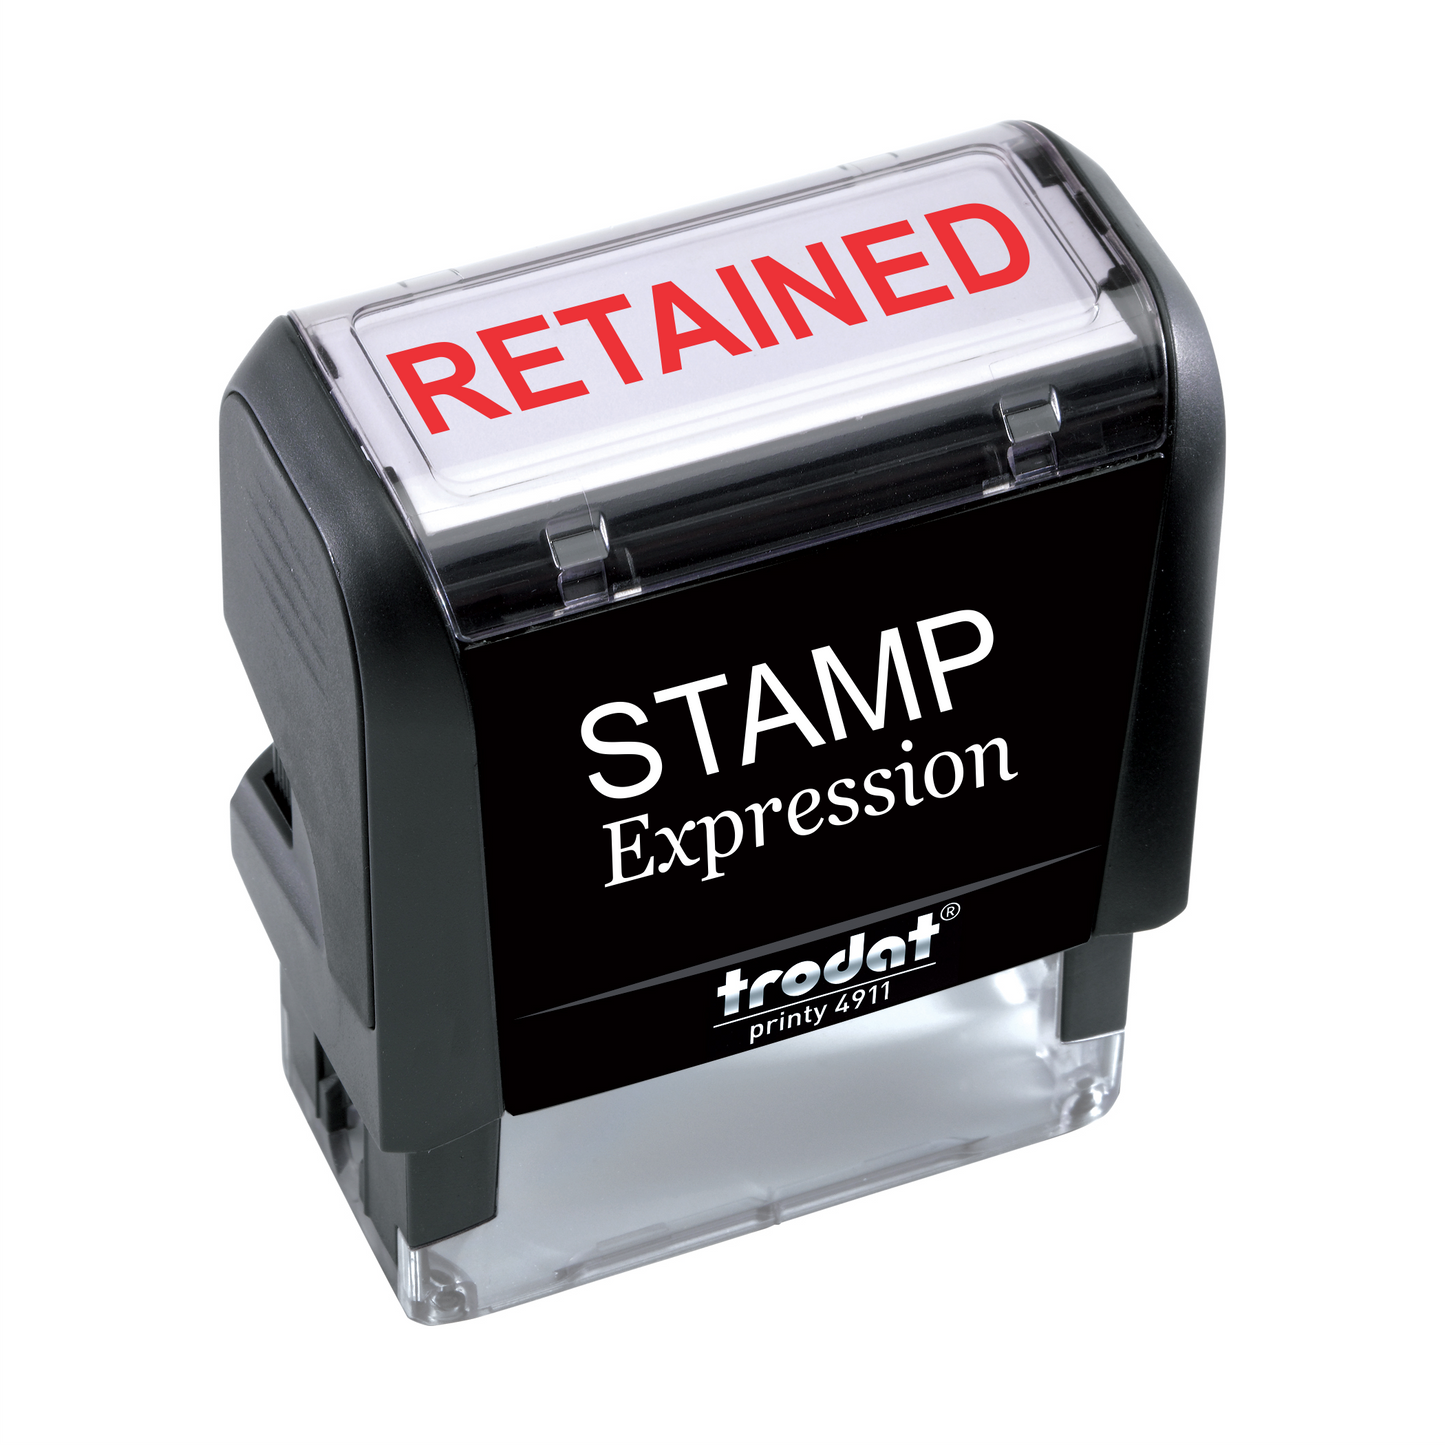 RETAINED Office Self Inking Rubber Stamp (SH-5774)